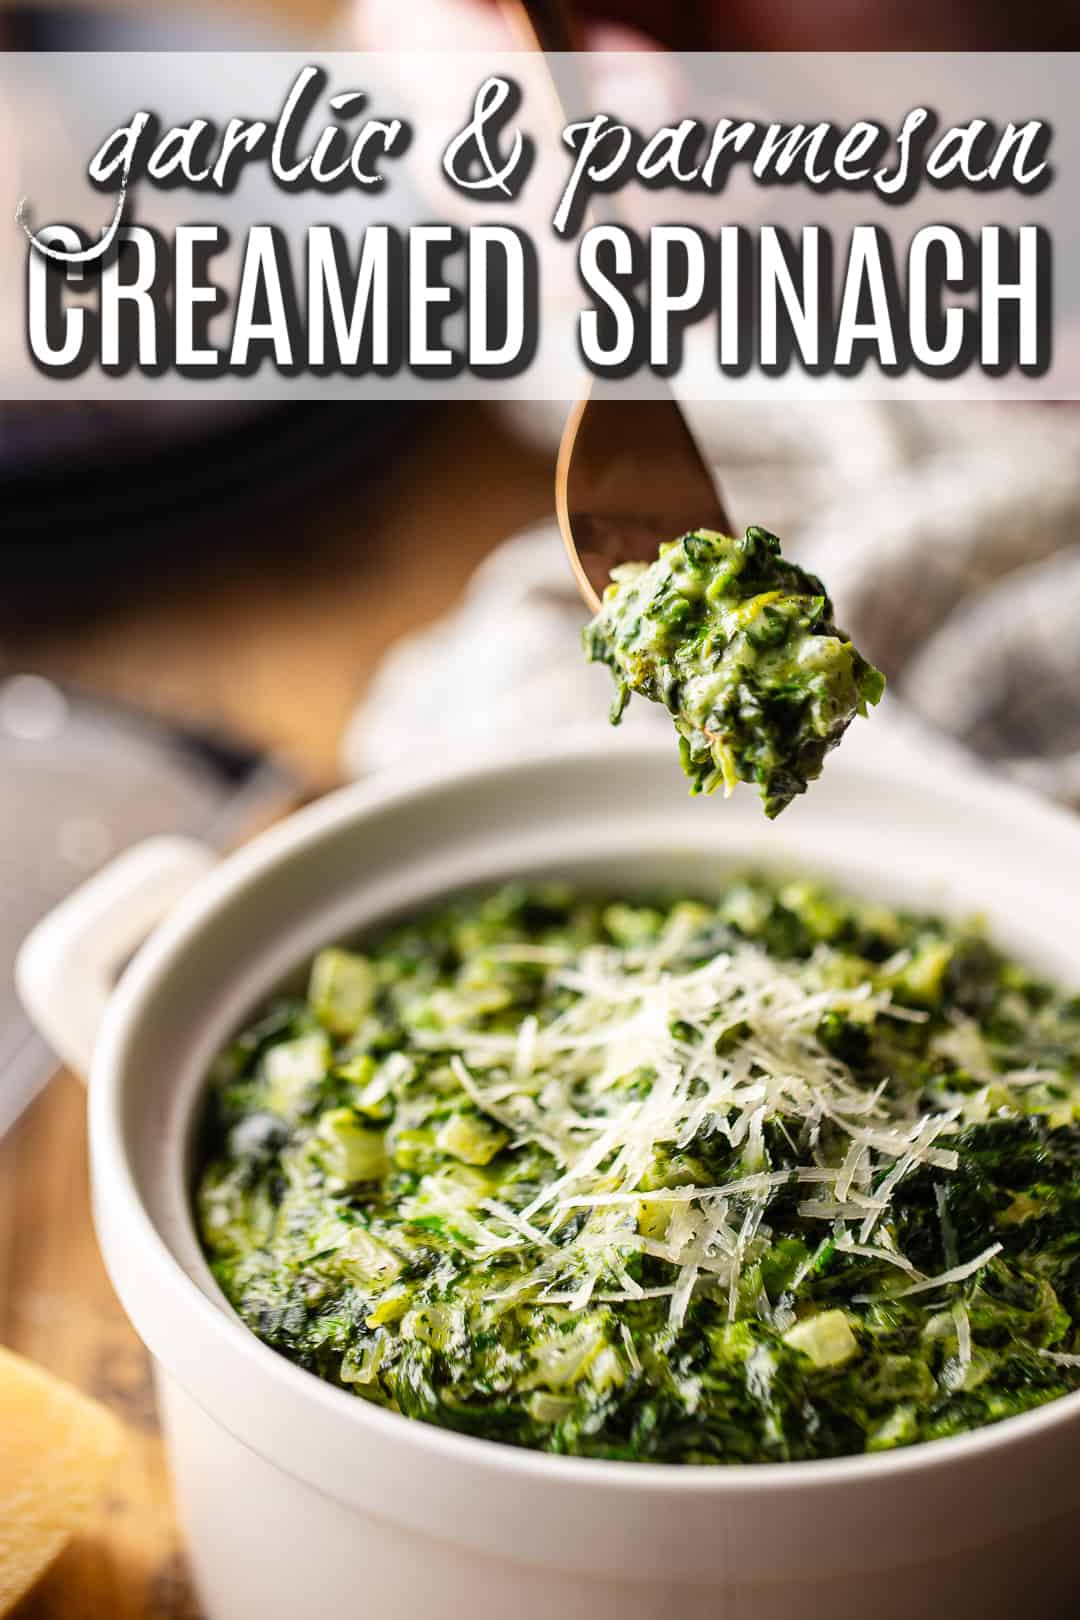 A forkful of creamed spinach being lifted from the serving dish.